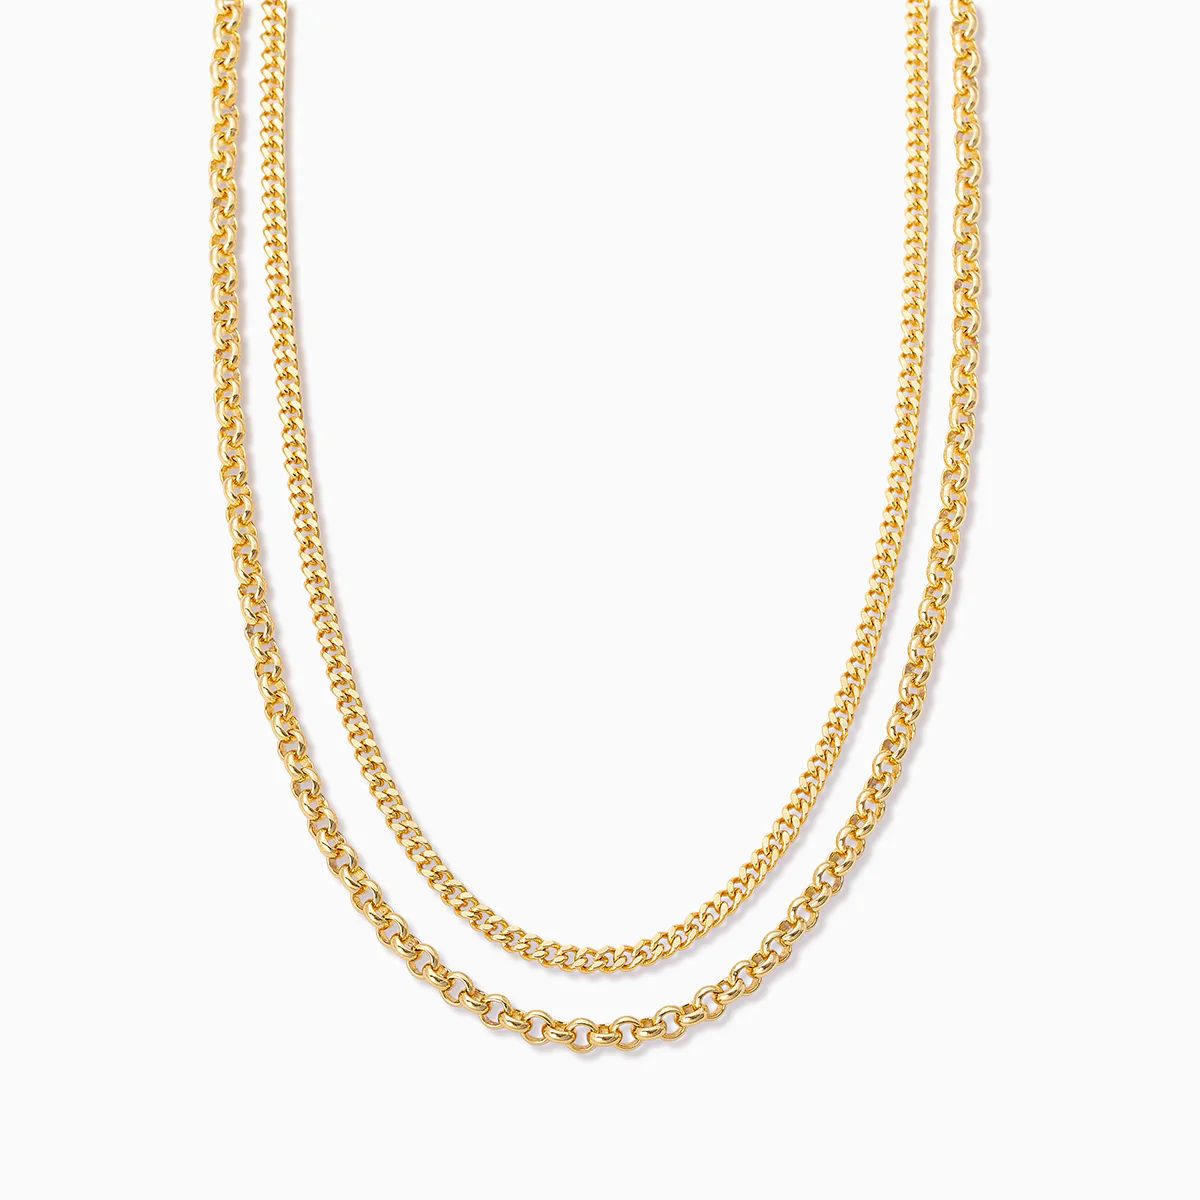 Double Up Chain Necklace in Gold | Chain Jewelry | Uncommon James | Uncommon James